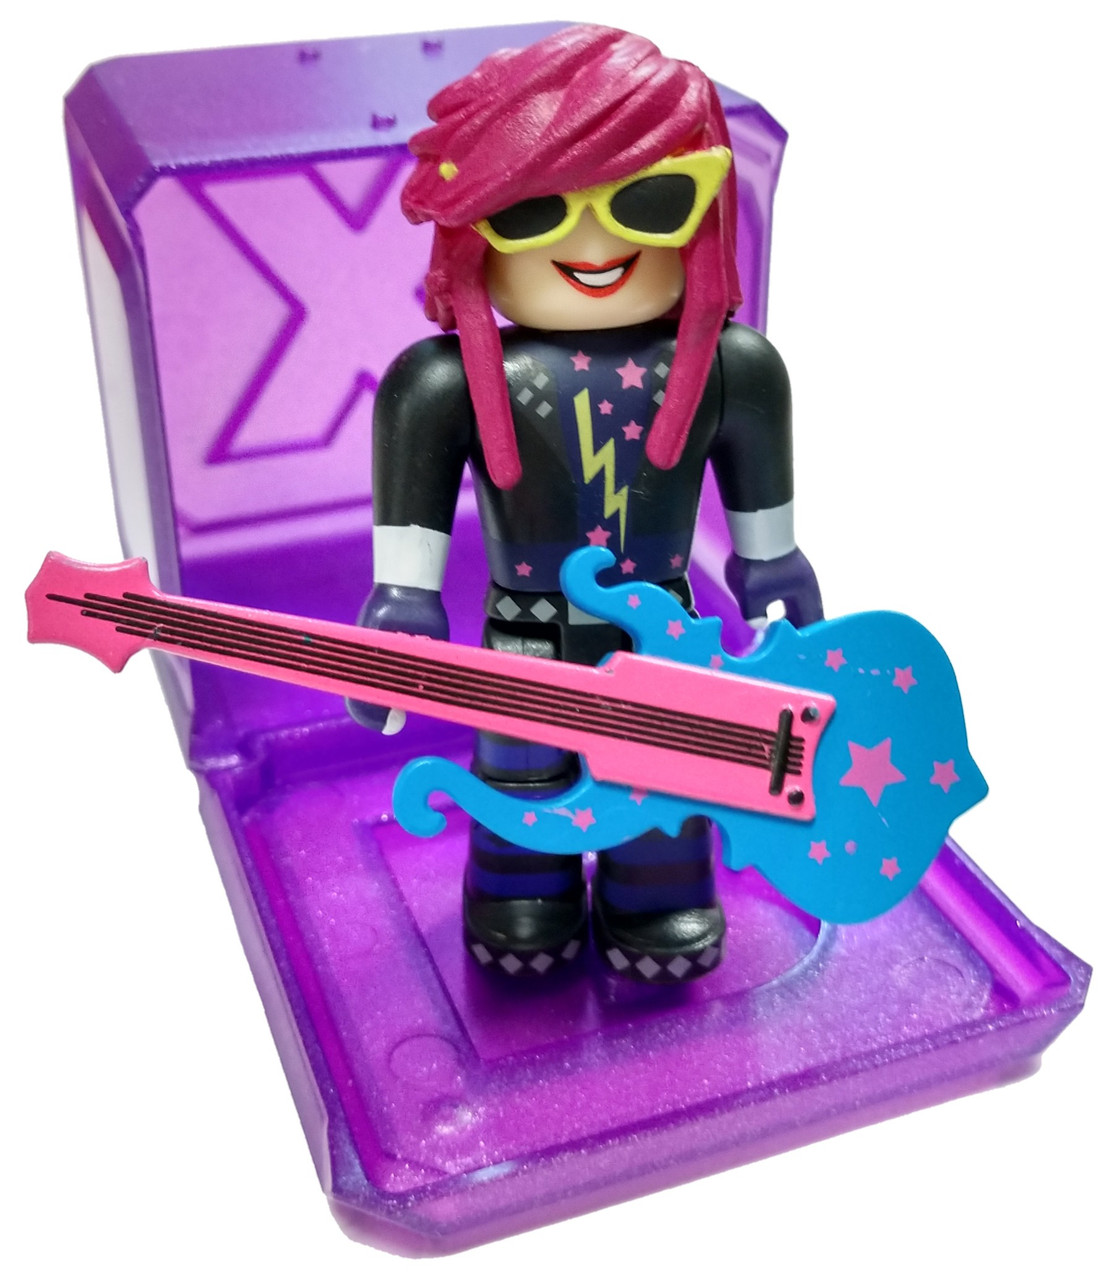 Roblox Celebrity Collection Series 3 Pop Queen Superstar Spectacular 3 Mini Figure With Cube And Online Code Loose Jazwares Toywiz - roblox celebrity gold series 2 figures toys 24pc set w